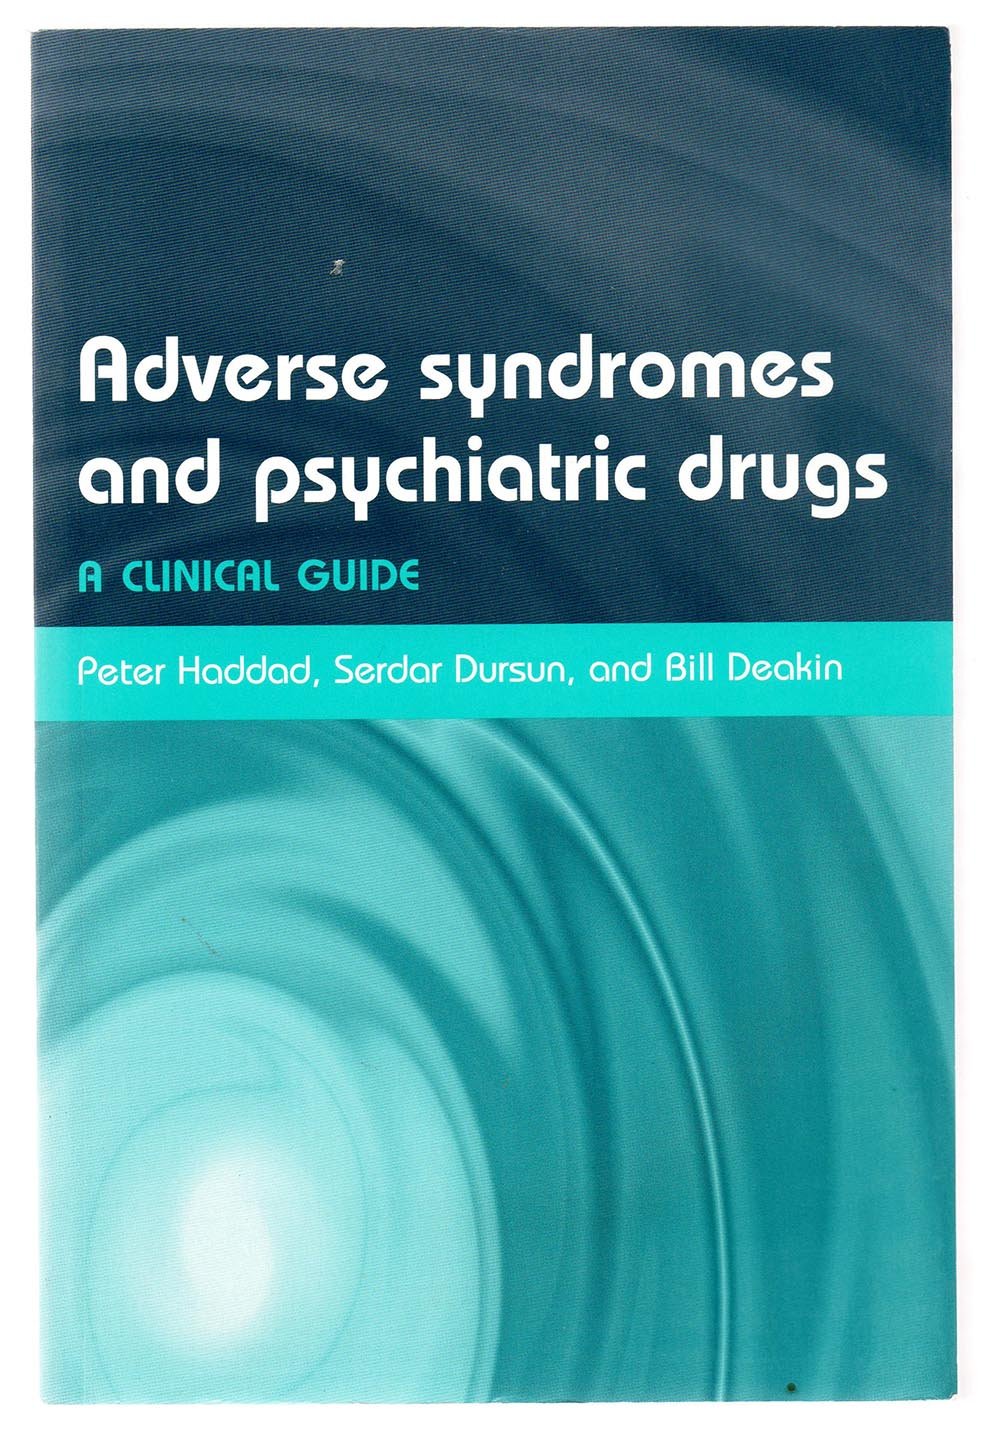 Adverse Syndromes and Psychiatric Drugs: A clinical guide